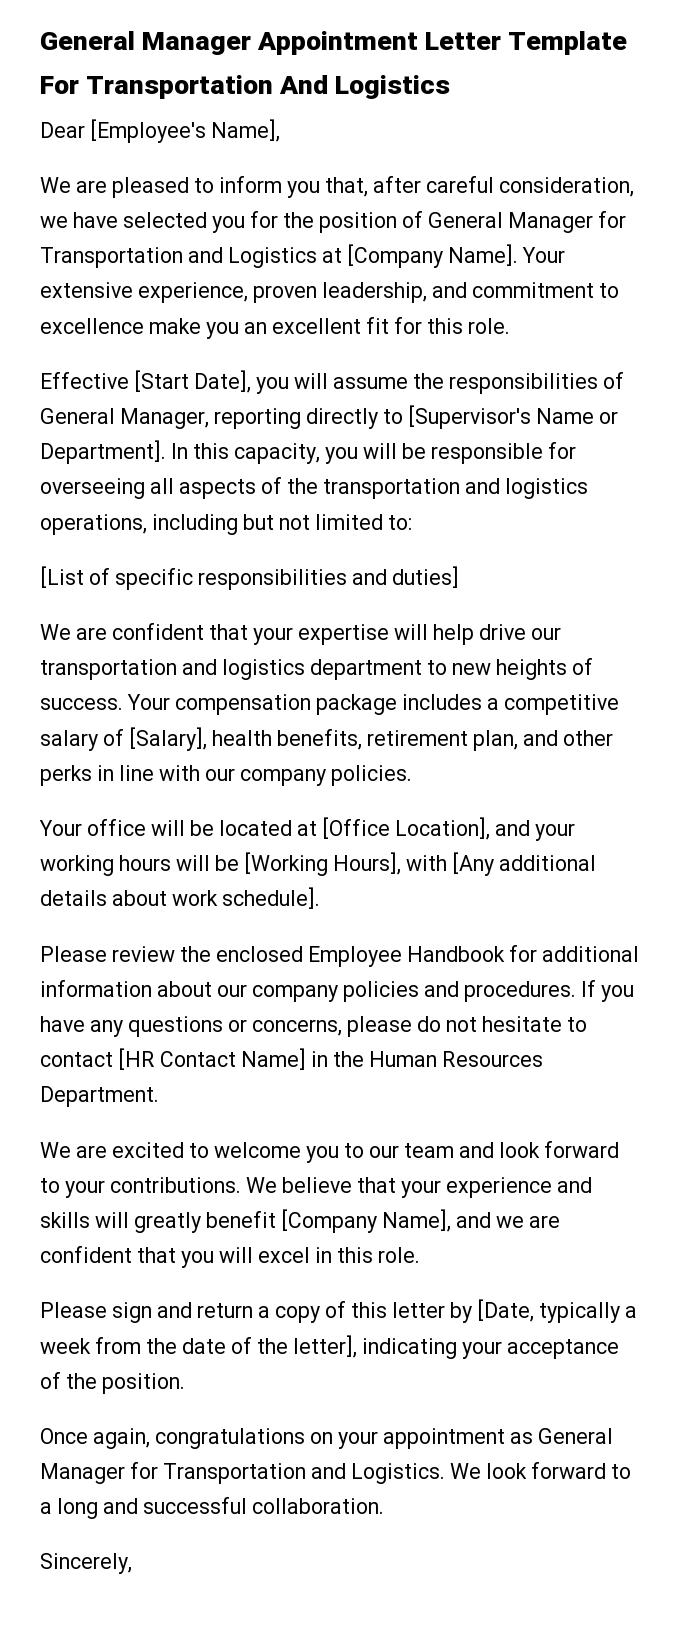 General Manager Appointment Letter Template For Transportation And Logistics